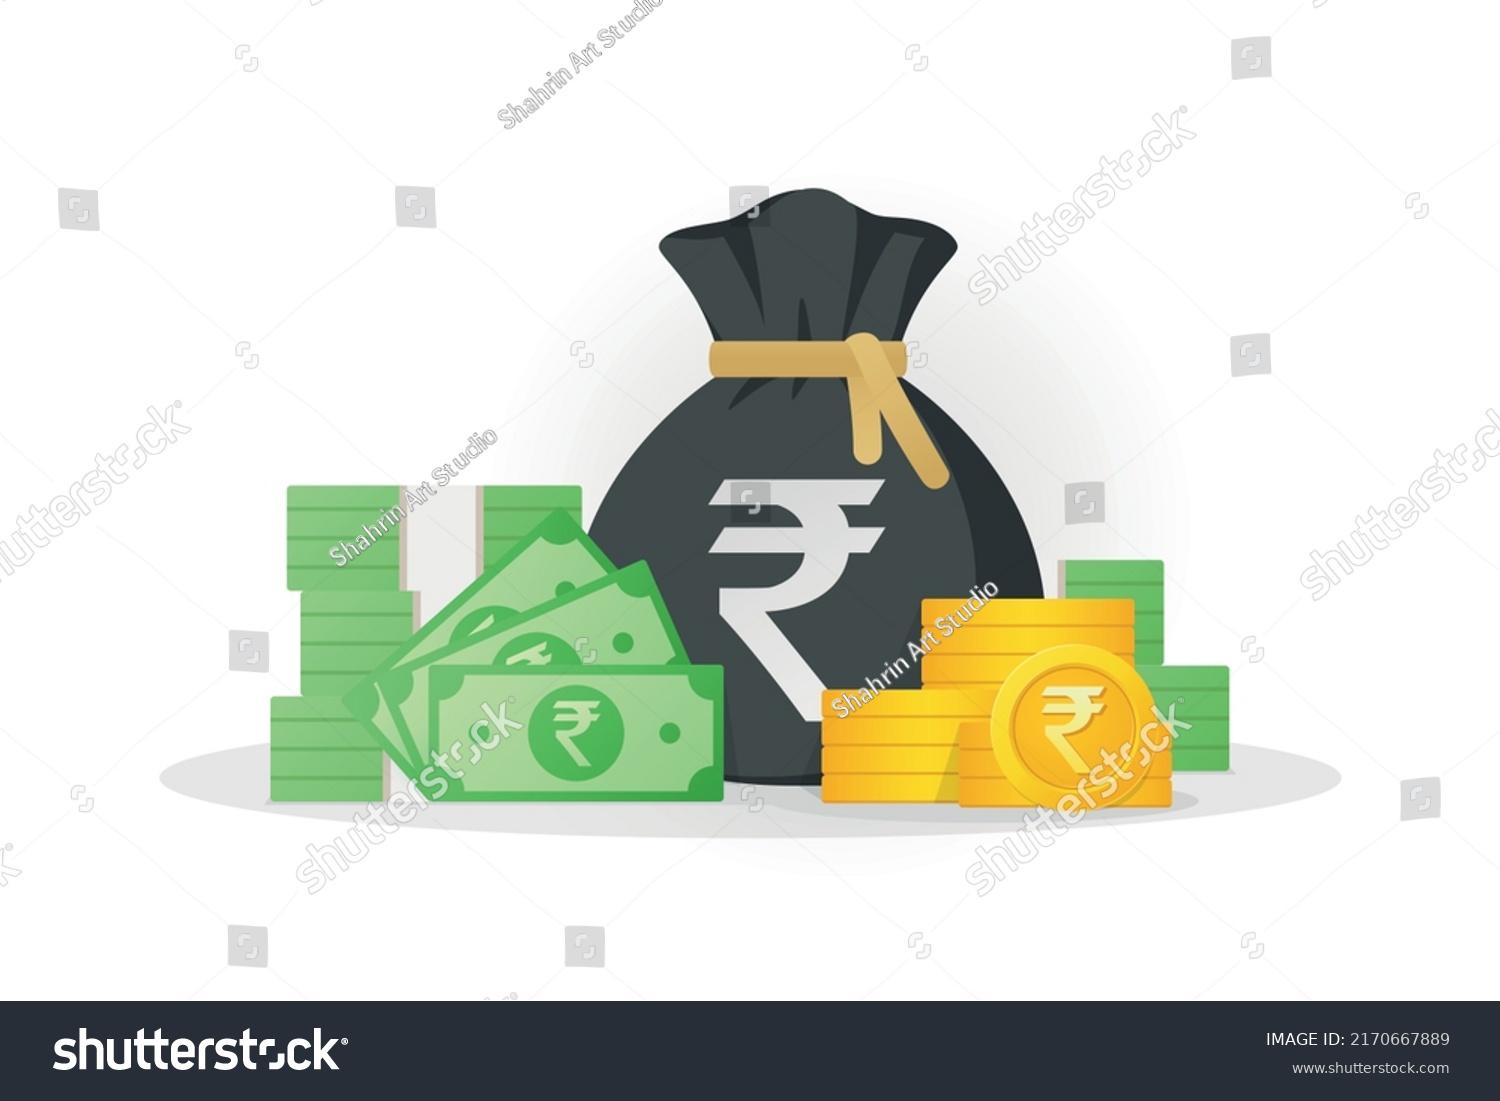 SVG of Money bag, banknotes and gold coins with rupee sign. Indian Cash money icon. Flat style eps-10 Vector illustration isolated on white background. svg